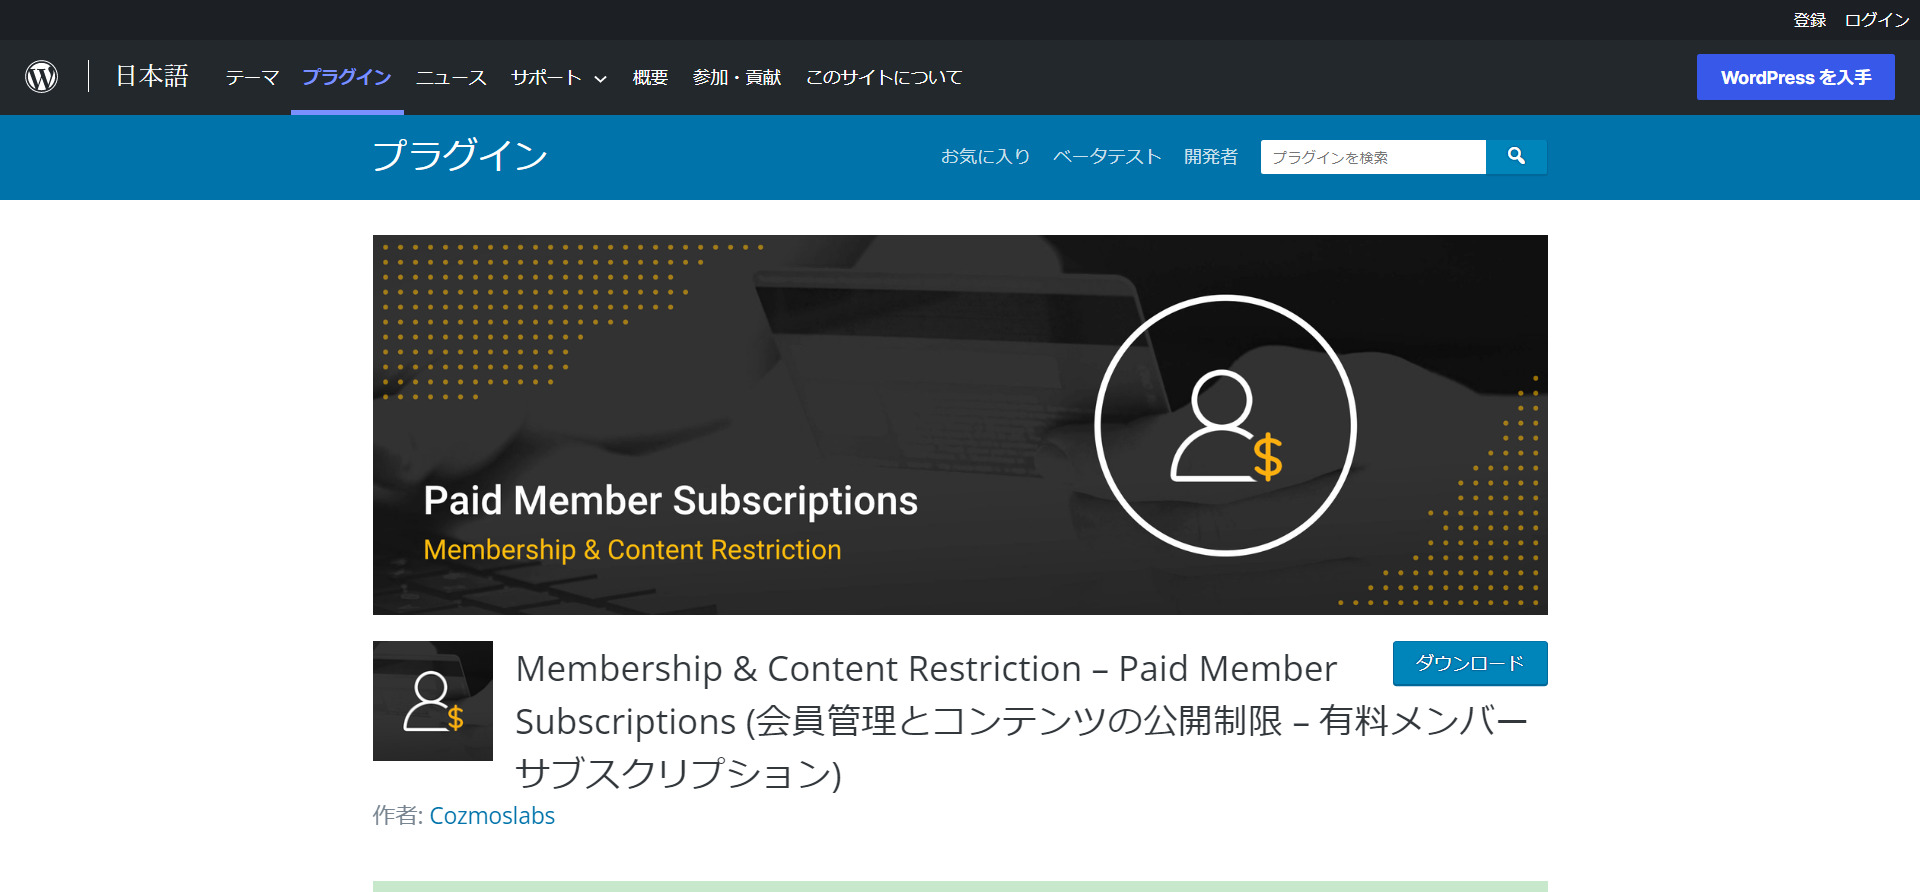 Membership & Content Restriction